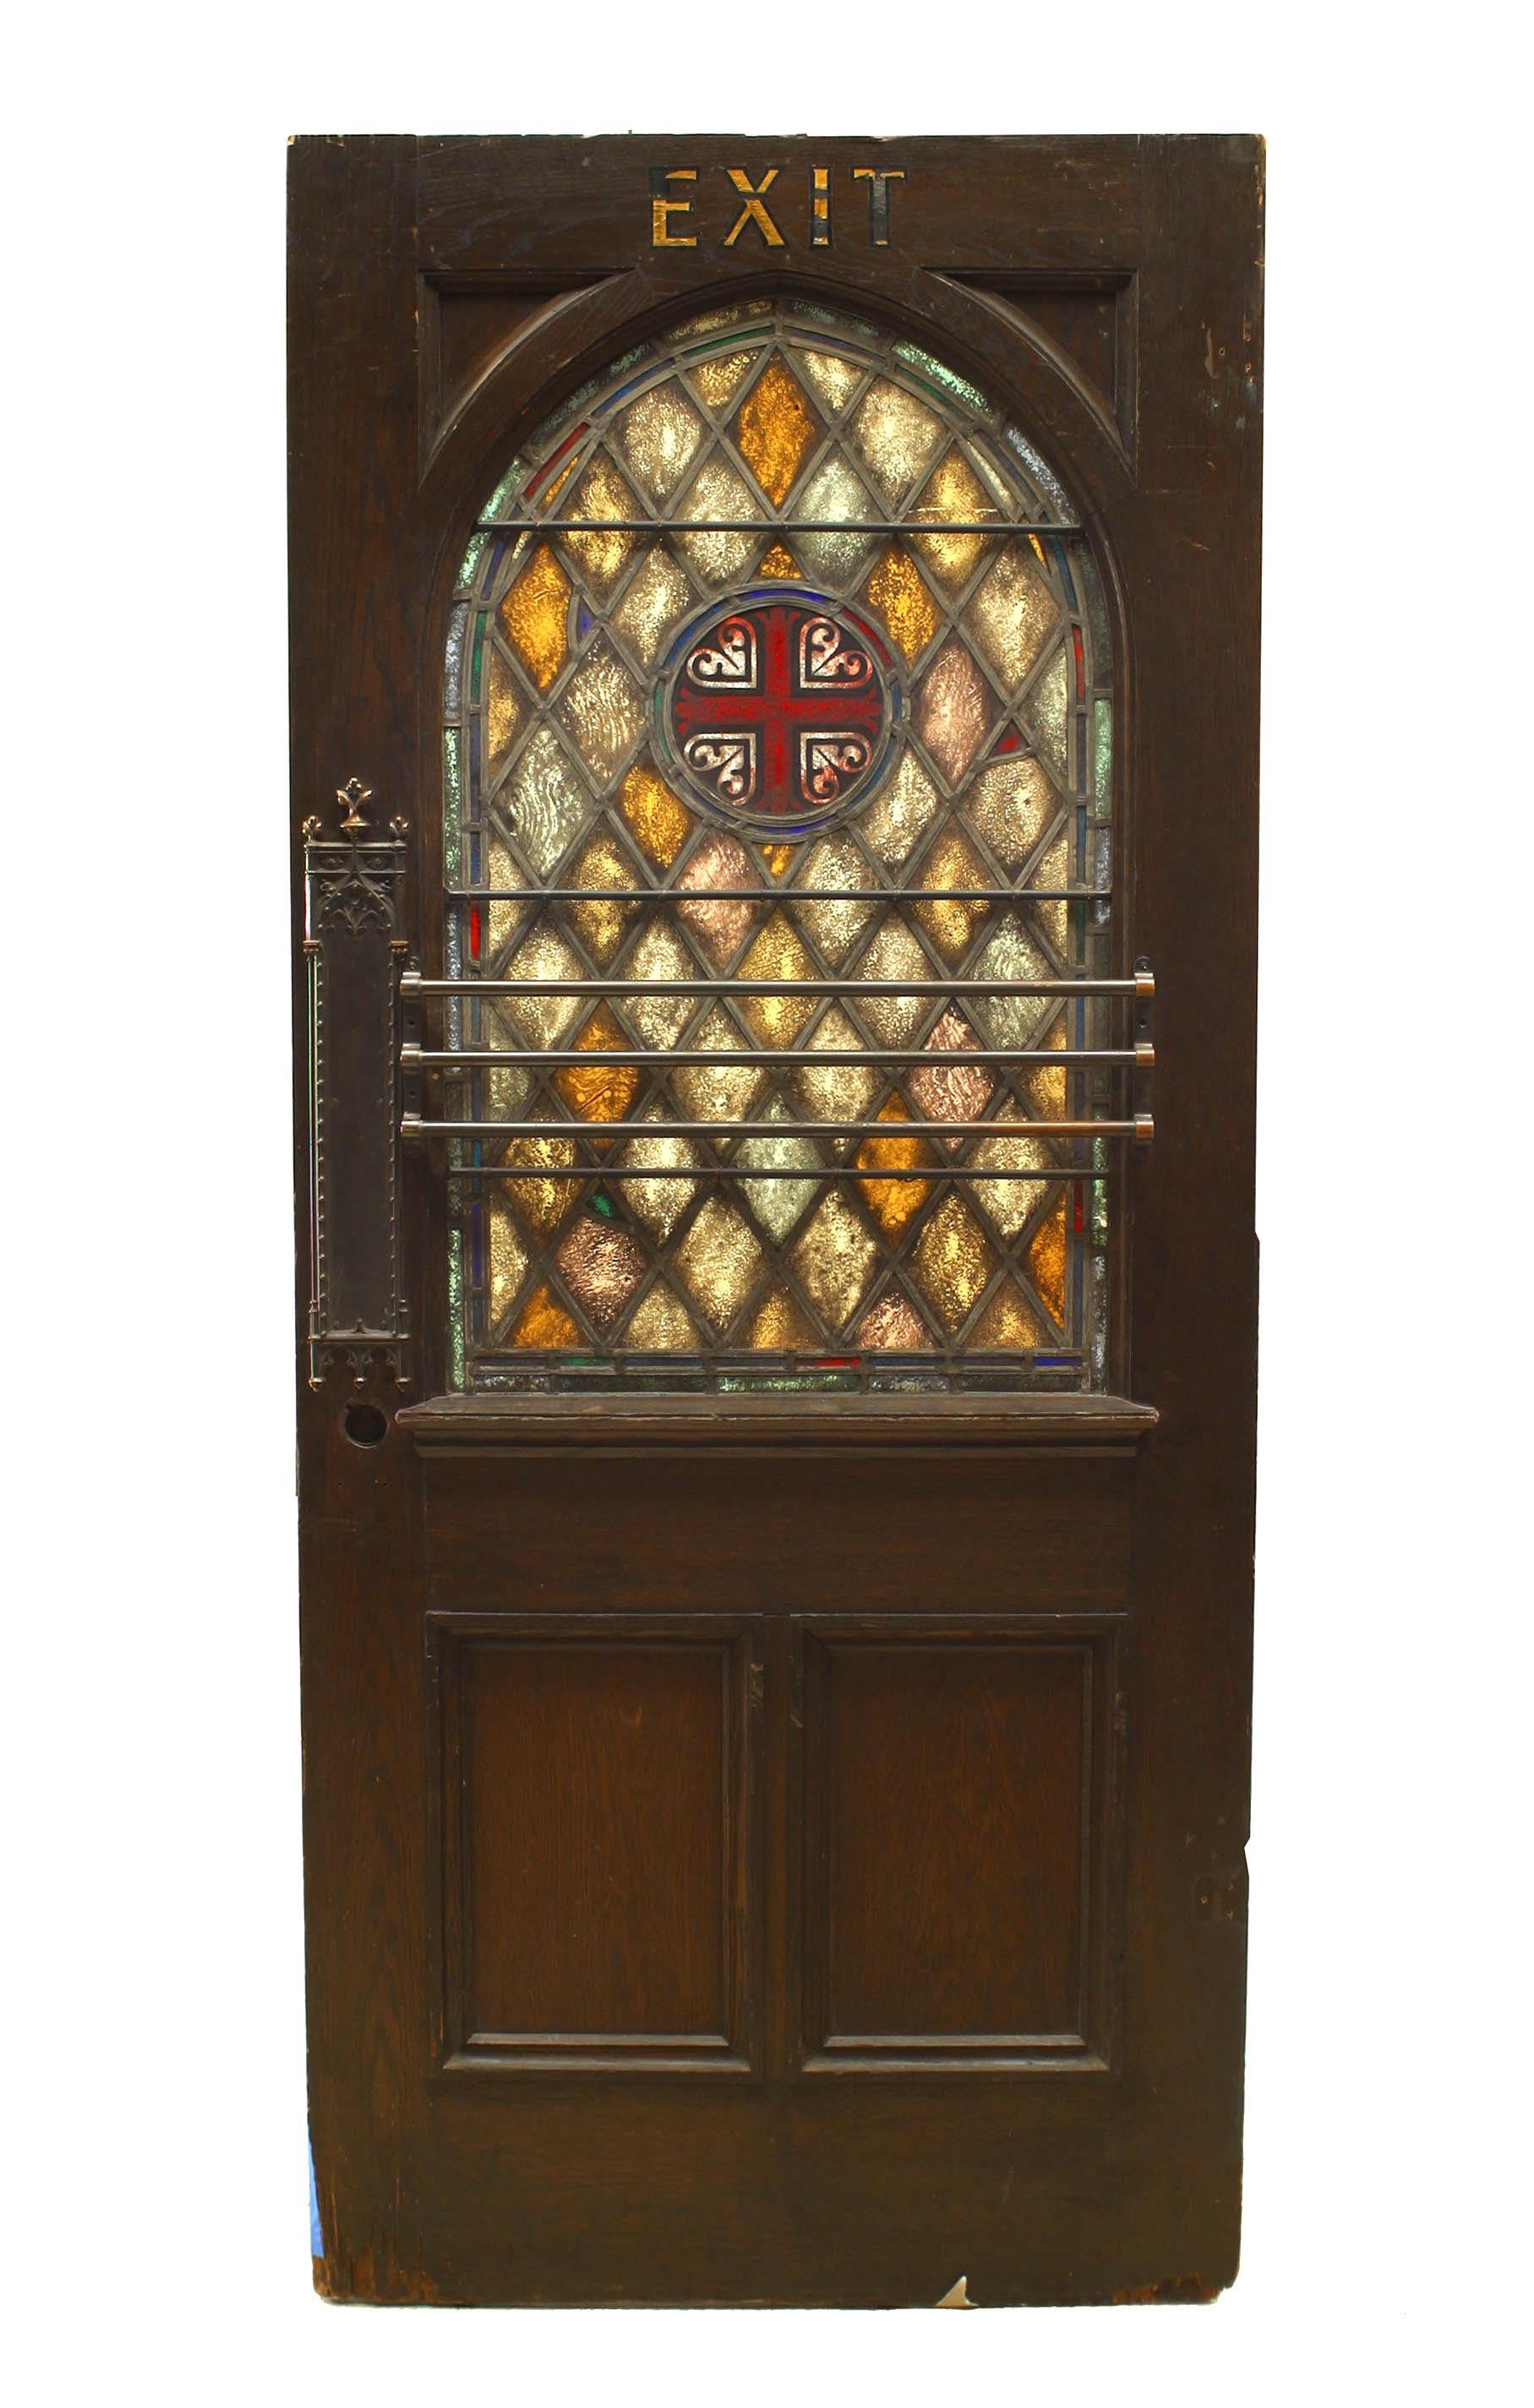 English Gothic style stained oak door with leaded glass panels and diamond design with cross, (19th century).